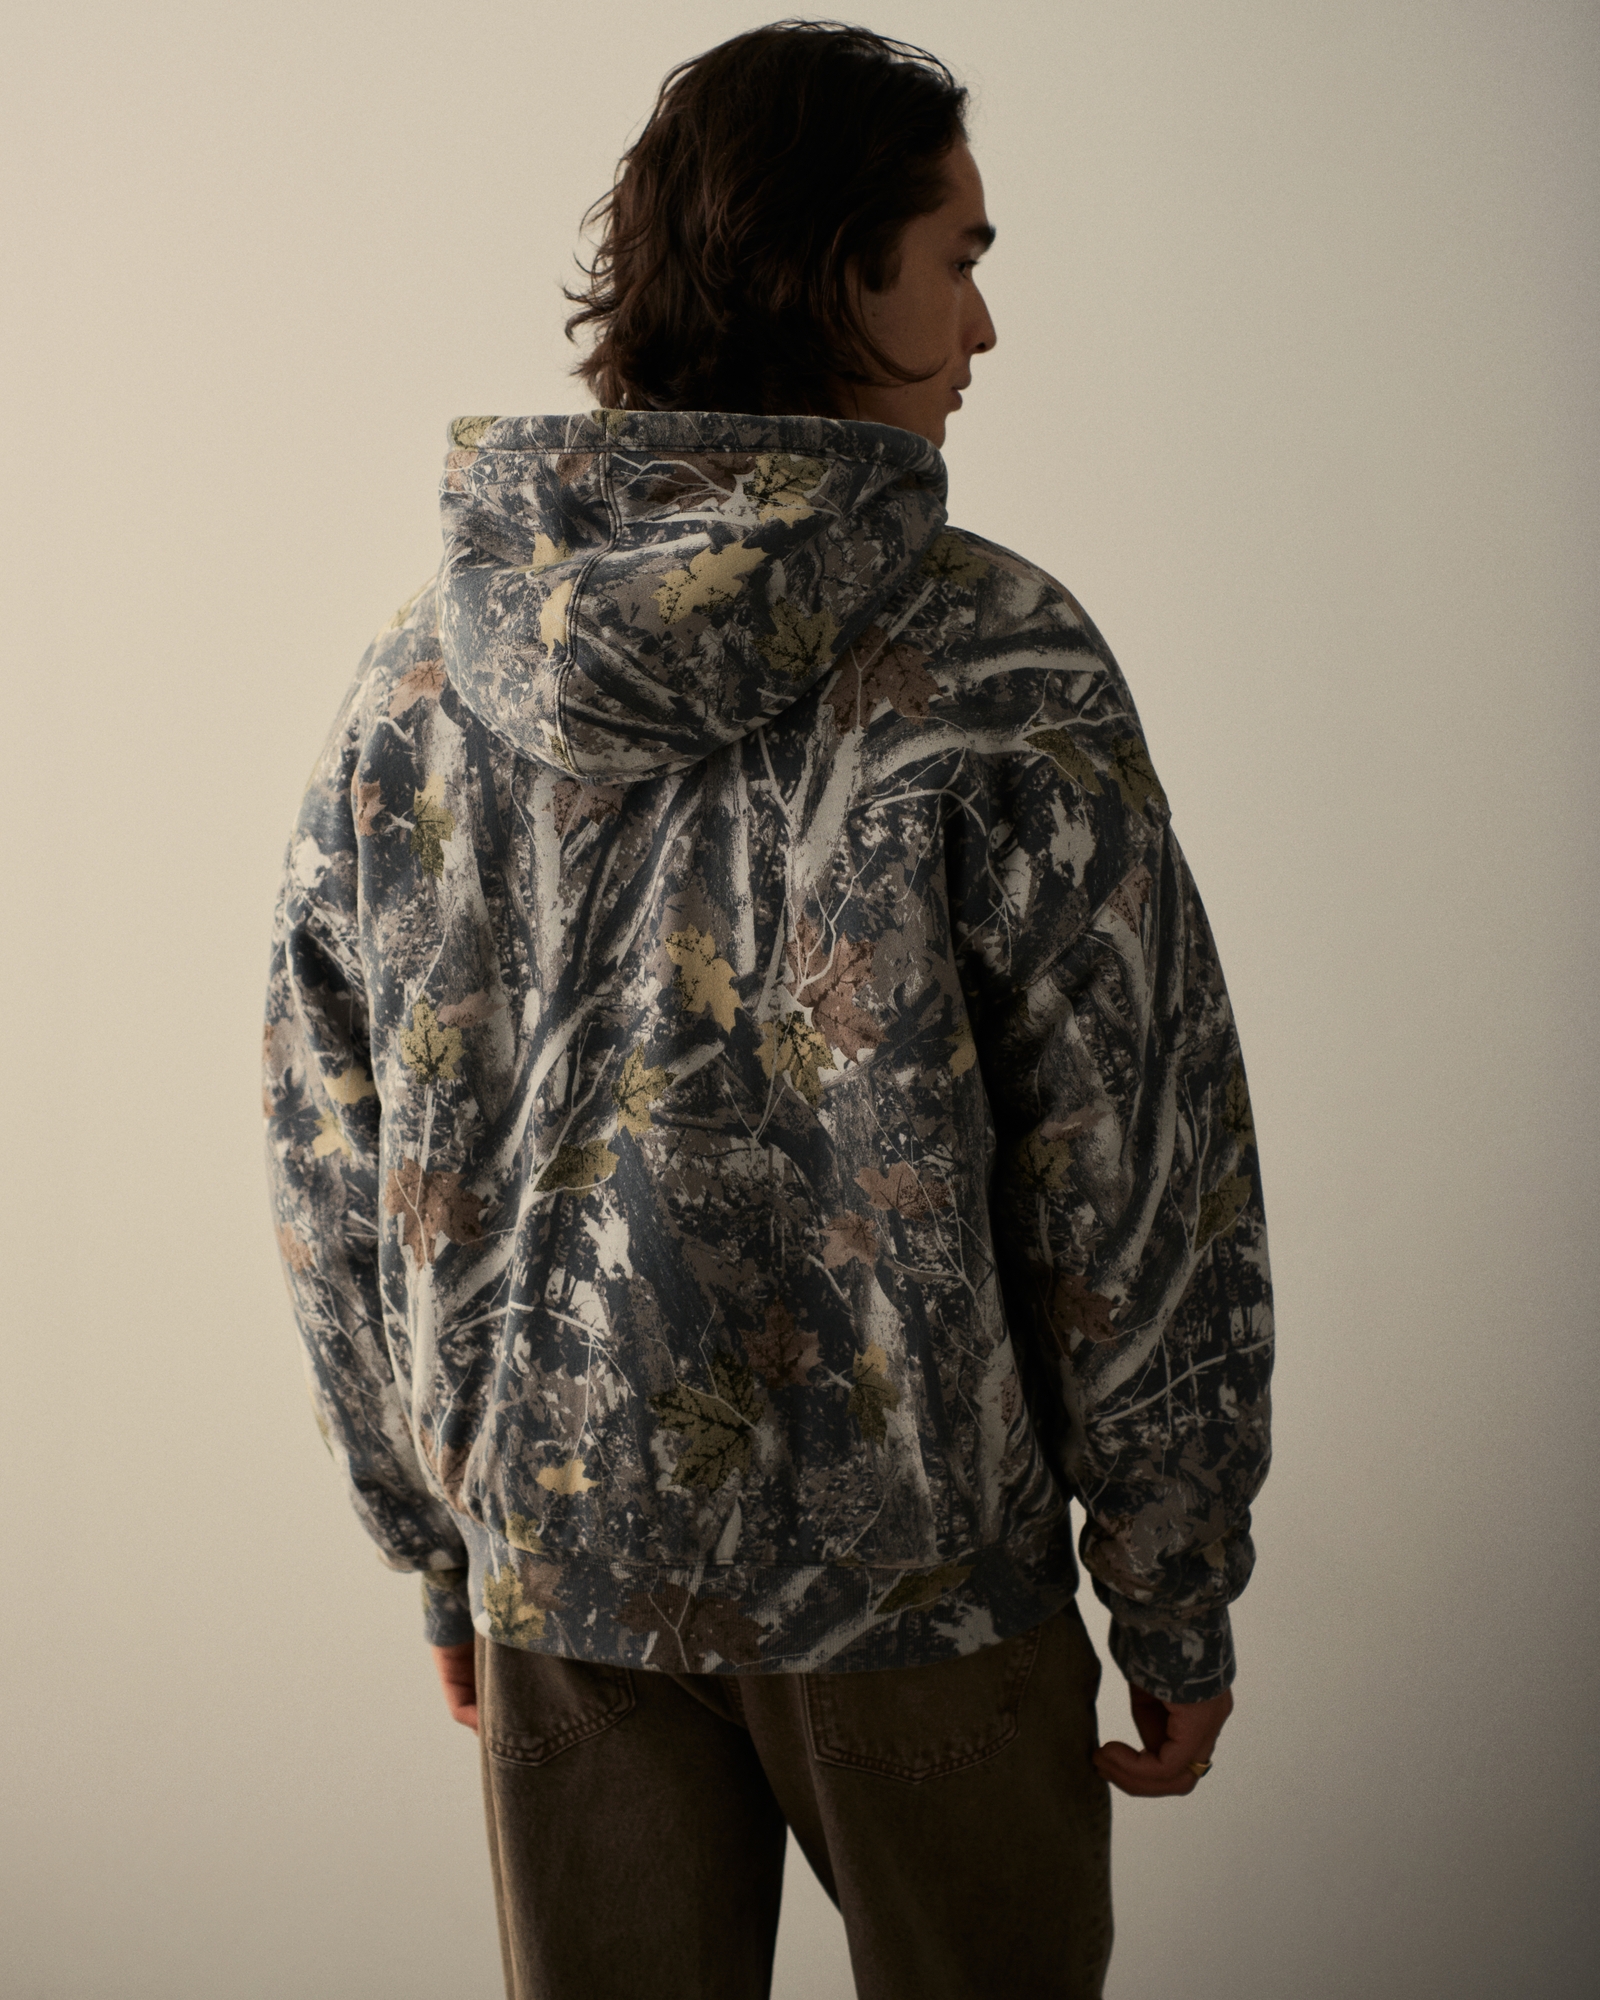 Abercrombie Camo Hoodie For Sale - William Jacket